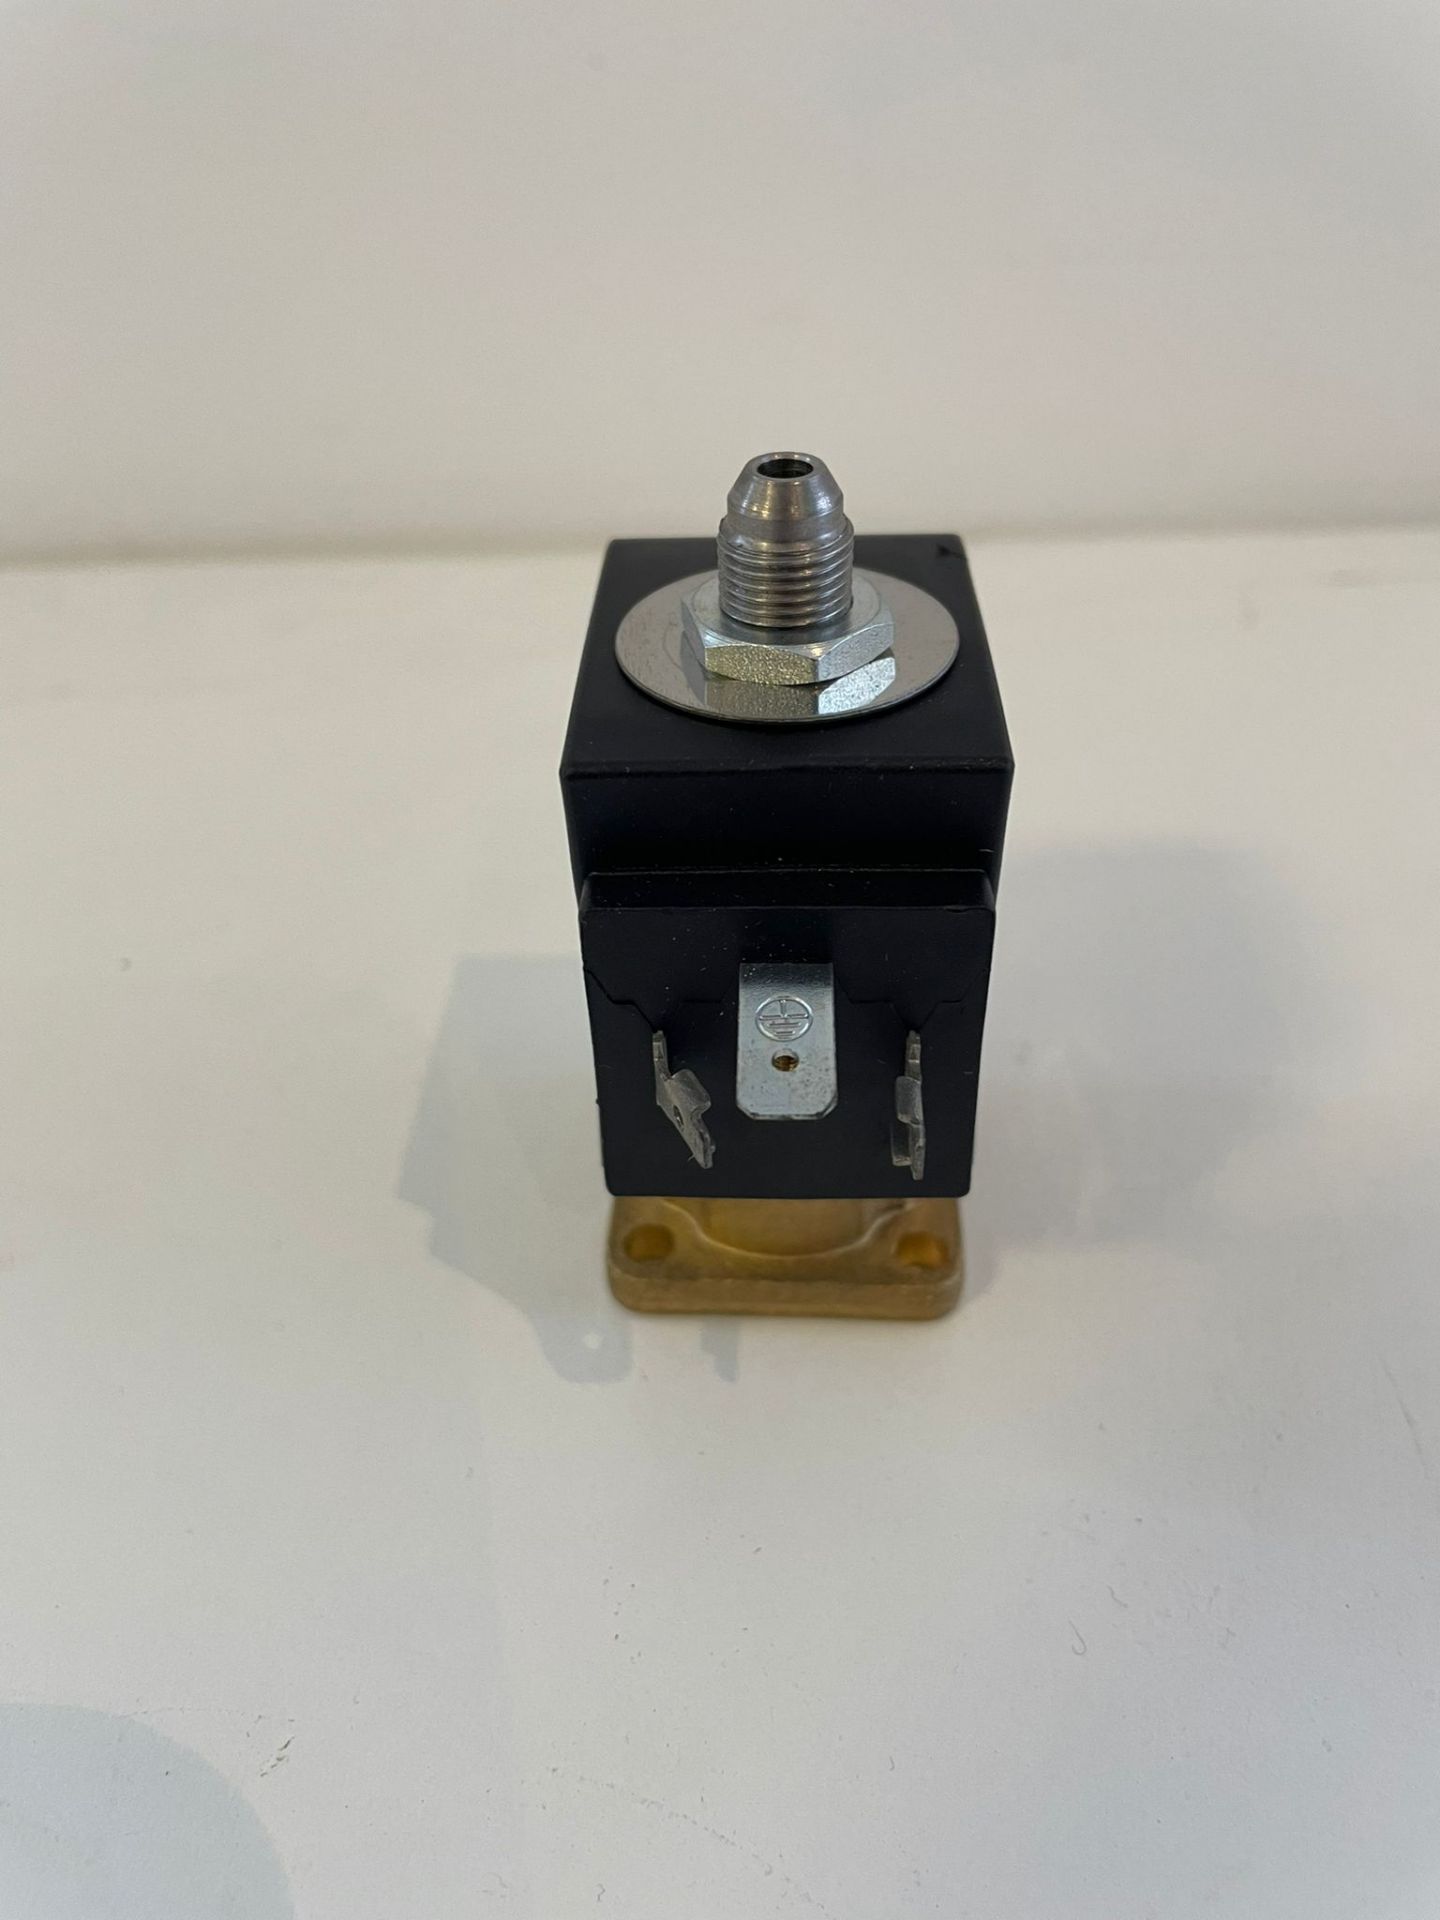 Sirai Solenoid Valve Type ZA32K P/N 533896700 Lot of 5 in packaging Majority with copper fixing - Image 7 of 7